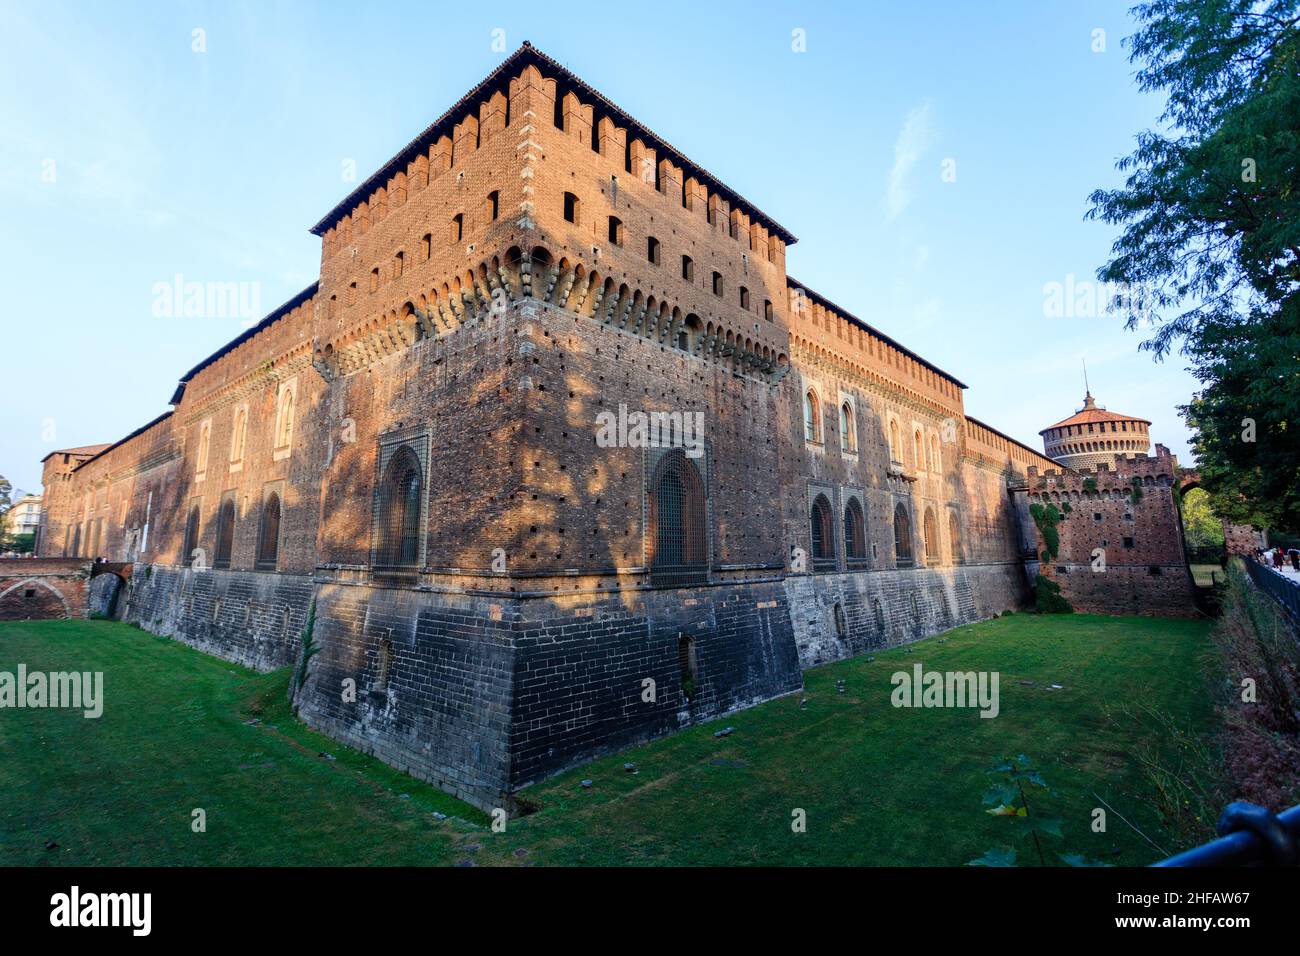 The Castello Sforzesco is a medieval fortification in Milan. Renovated in the 16th and 17th century becoming one of the largest citadels of Europe. Stock Photo